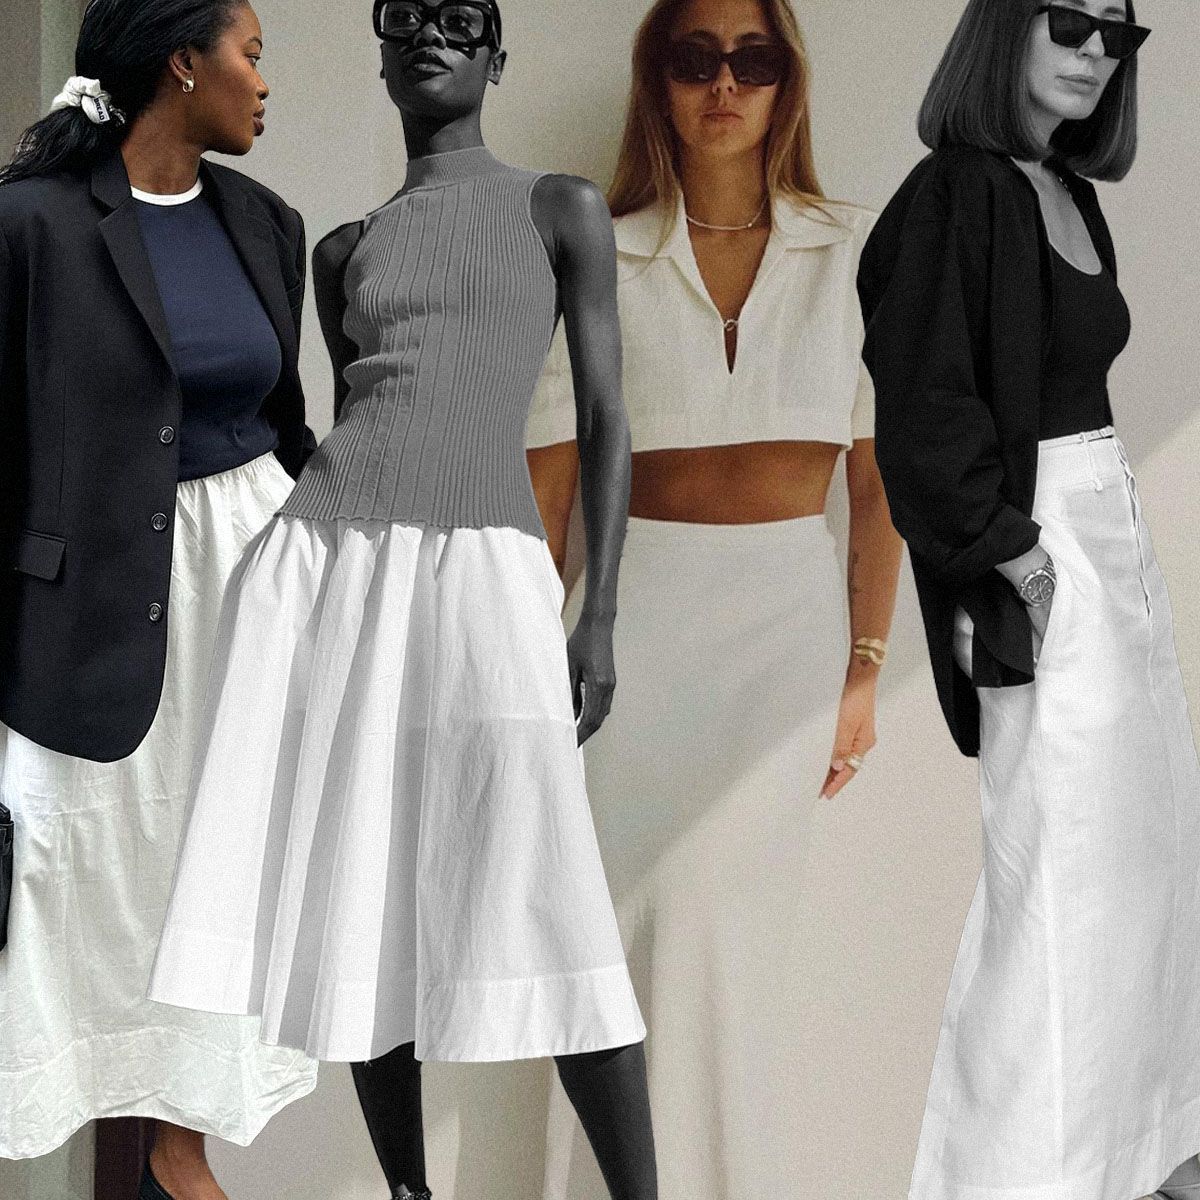 White Button Skirt Outfits (9 ideas & outfits)